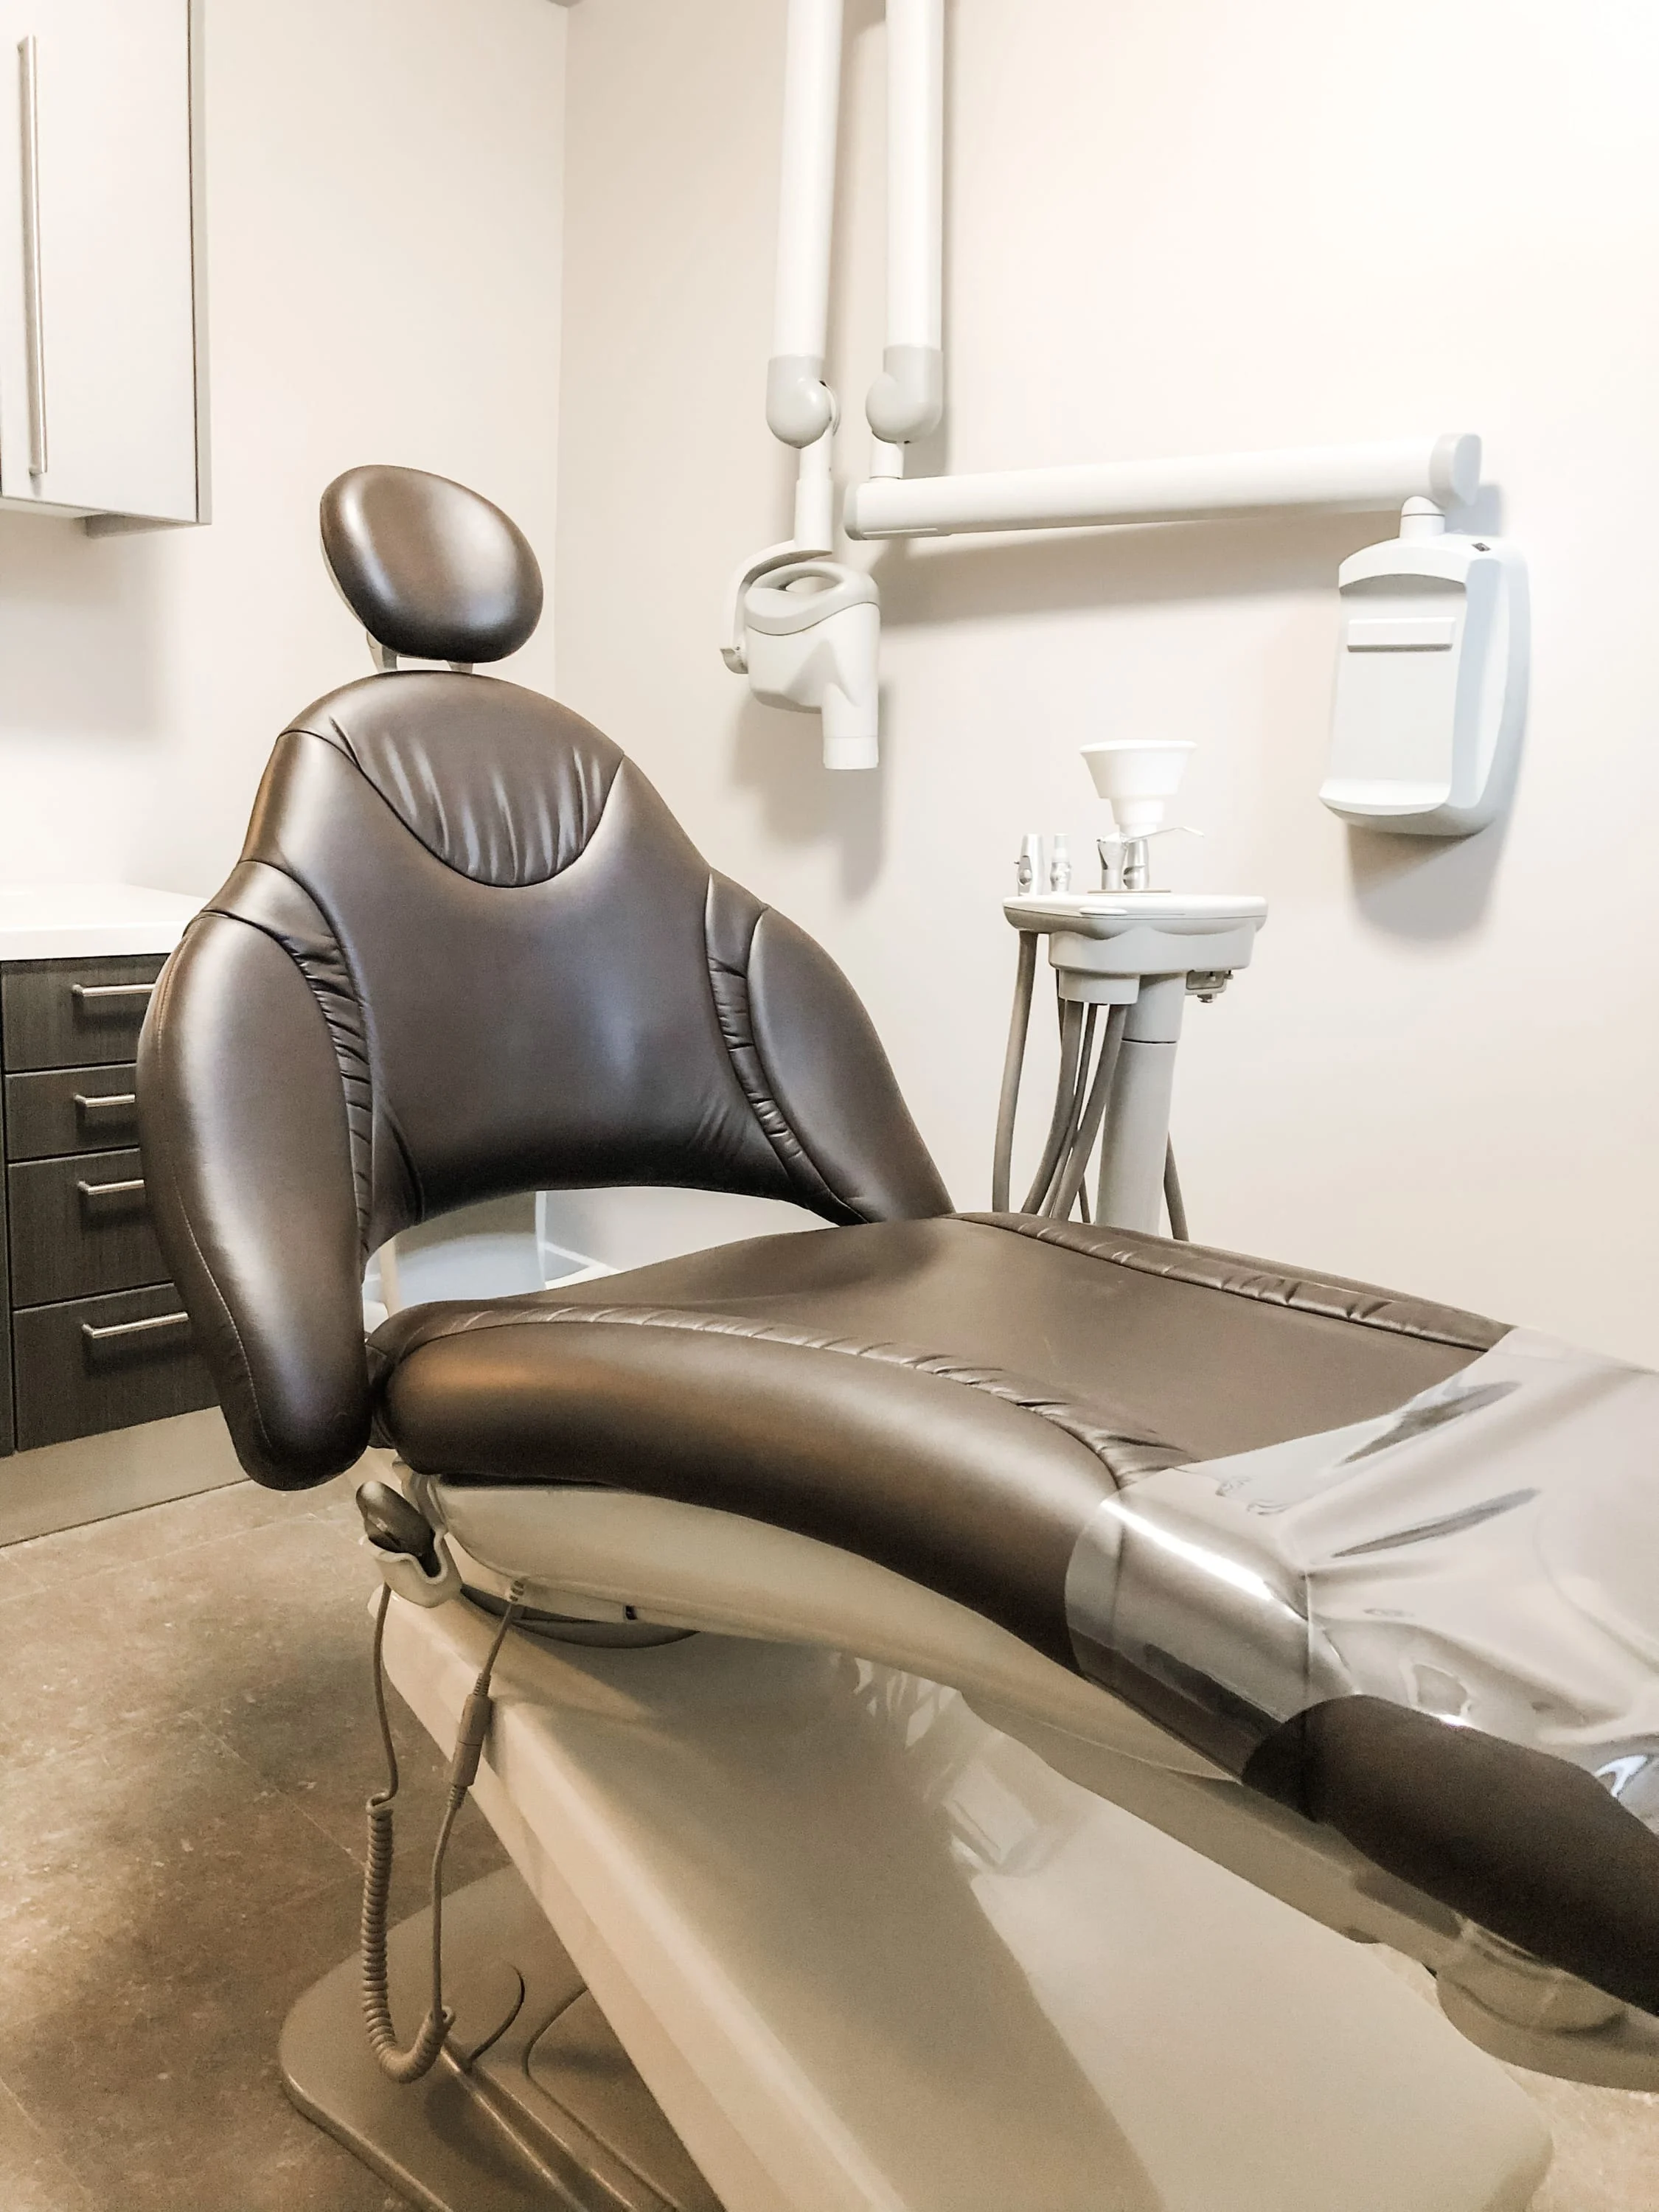 Comfortable dental chairs